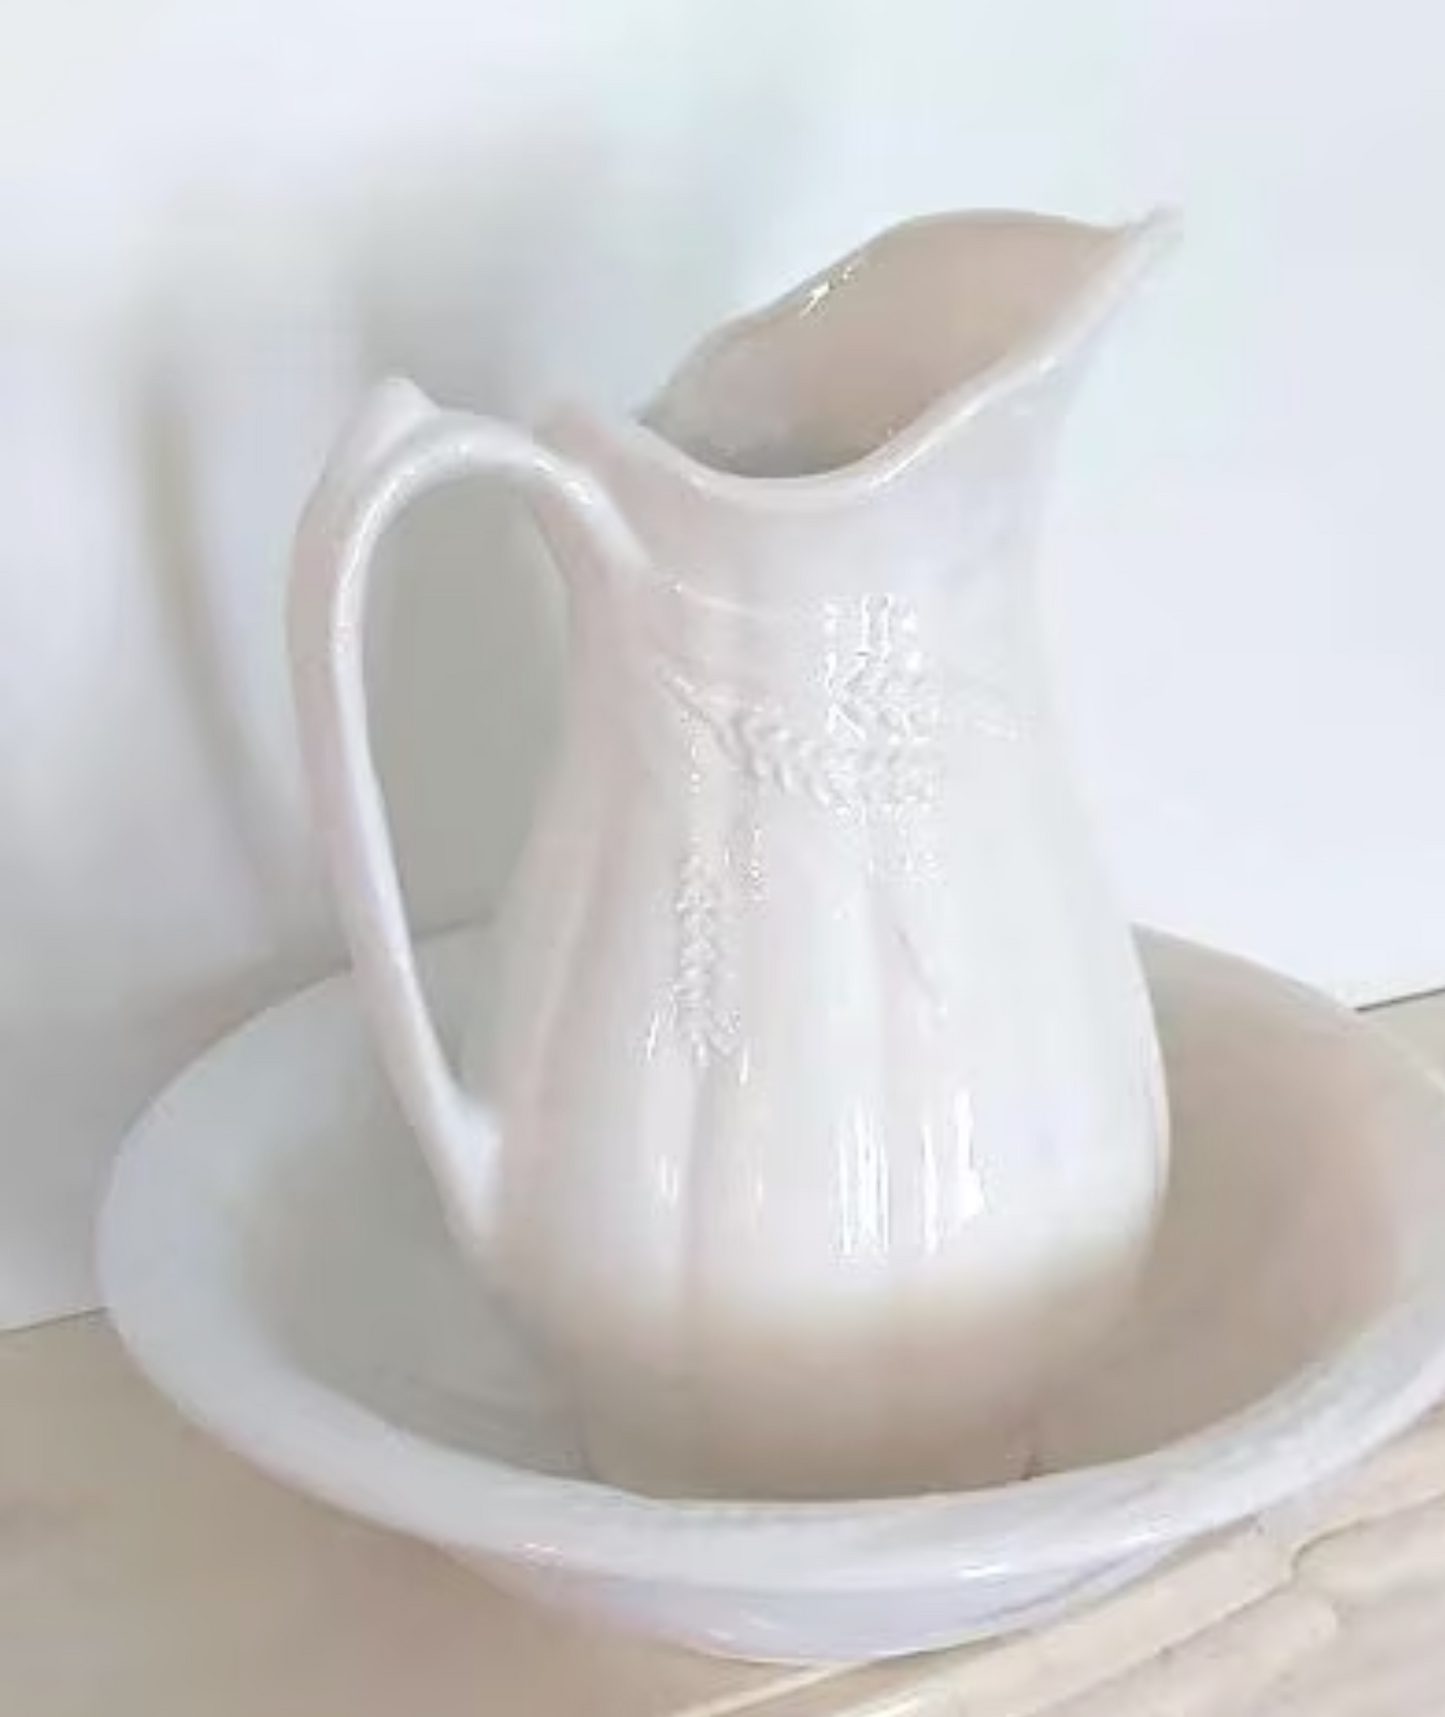 Vintage White Ironstone Pitcher and Basin Set - Antique Wash Bowl and Pitcher - Classic Home Decor Collectible | Wheat design pitcher